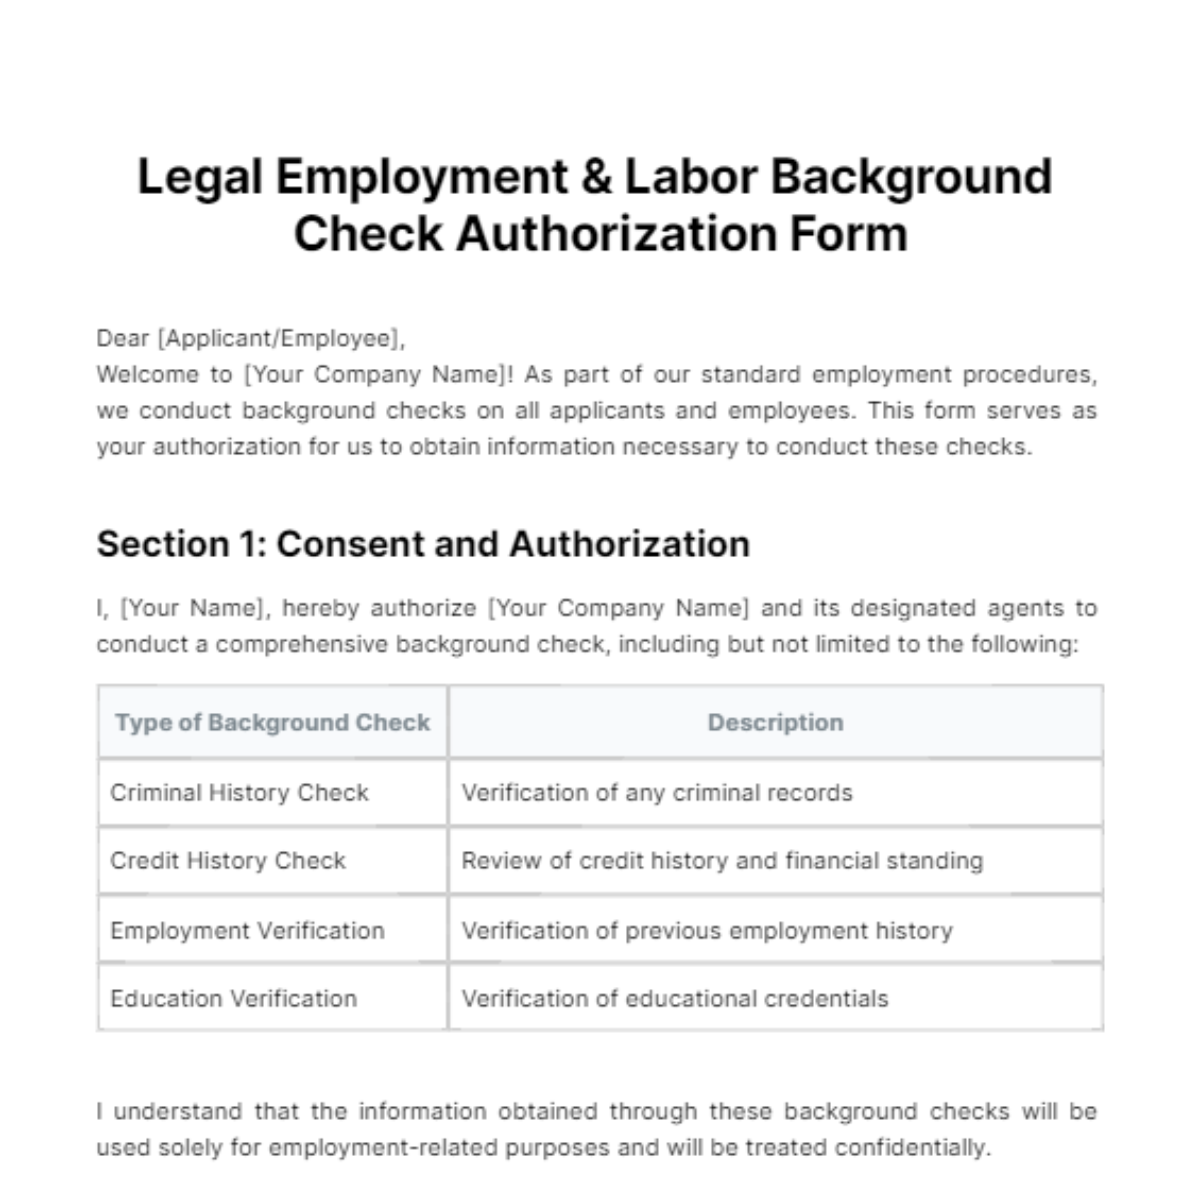 Legal Employment & Labor Background Check Authorization Form Template